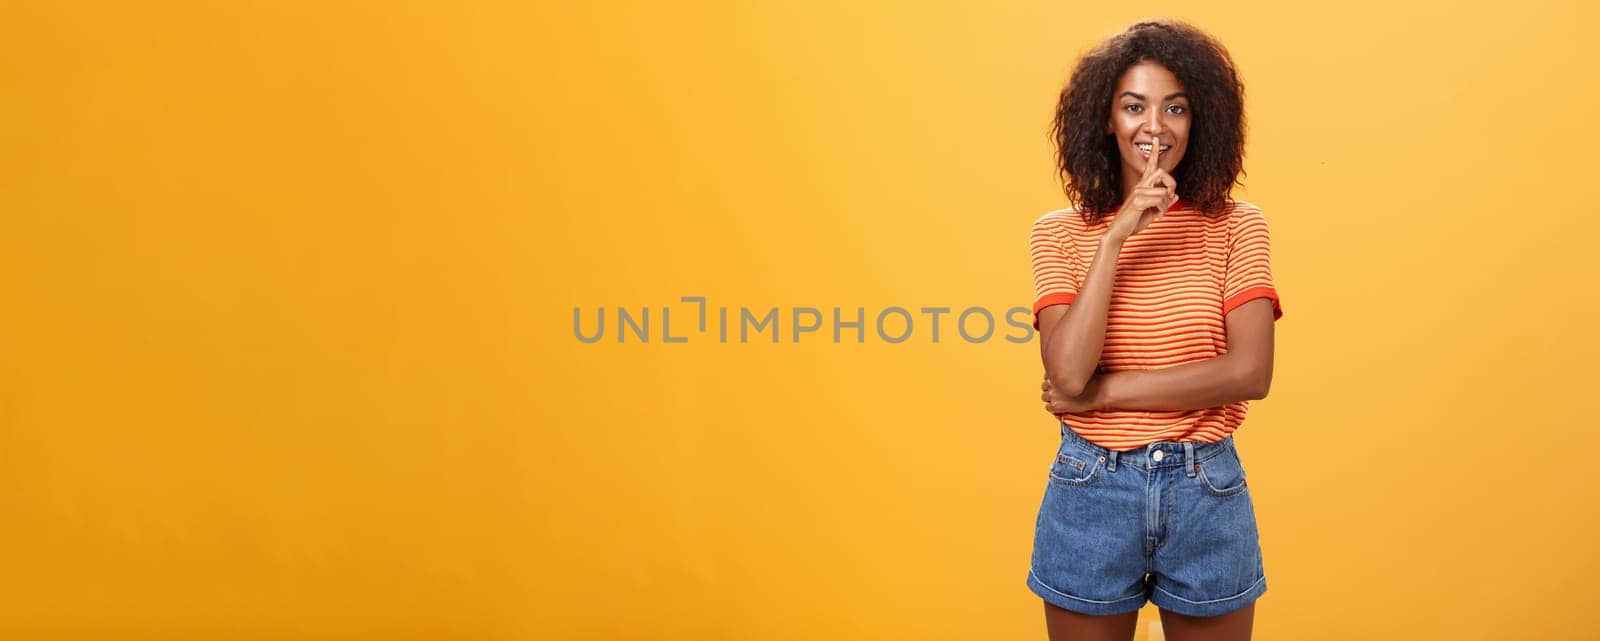 Keep secret inside I trust you. Feminine and sensual good-looking stylish dark-skinned woman with curly hair in trendy outfit shushing at camera with delighted mysterious look hiding something. Body language concept